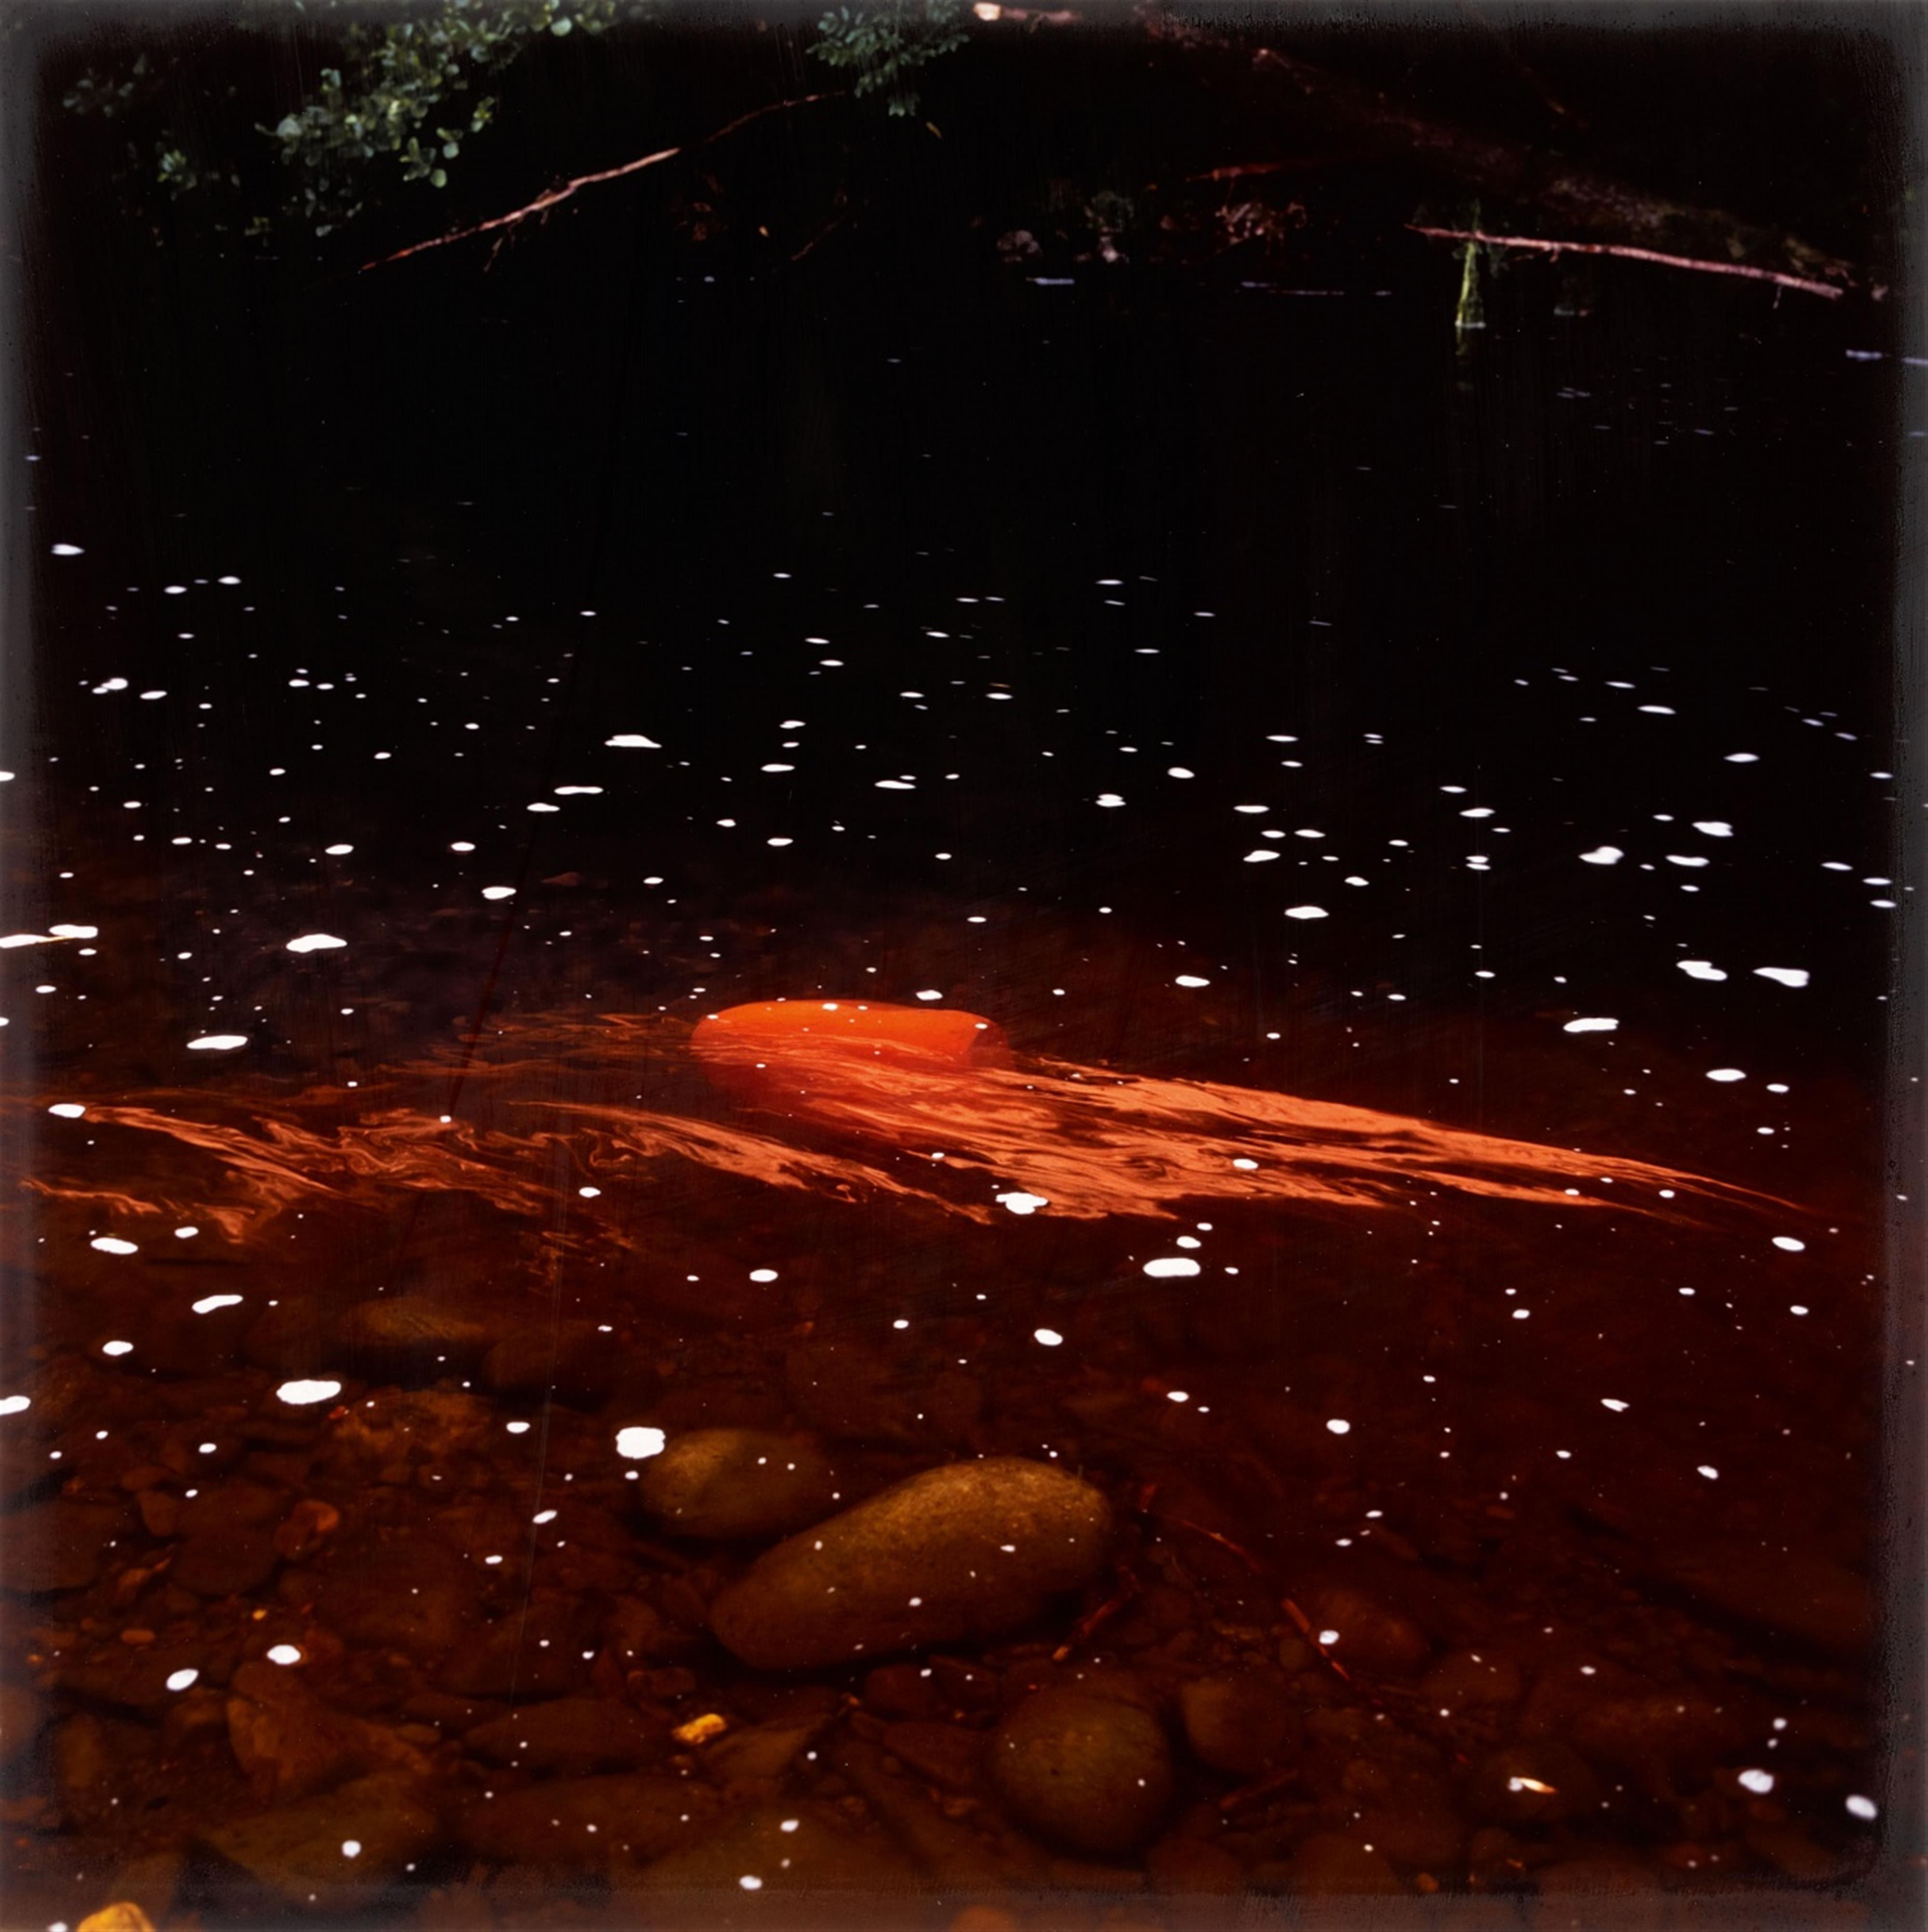 Andy Goldsworthy - River Rock, drawn over with a soft red stone, Scaur Water, Dumfriesshire - image-3